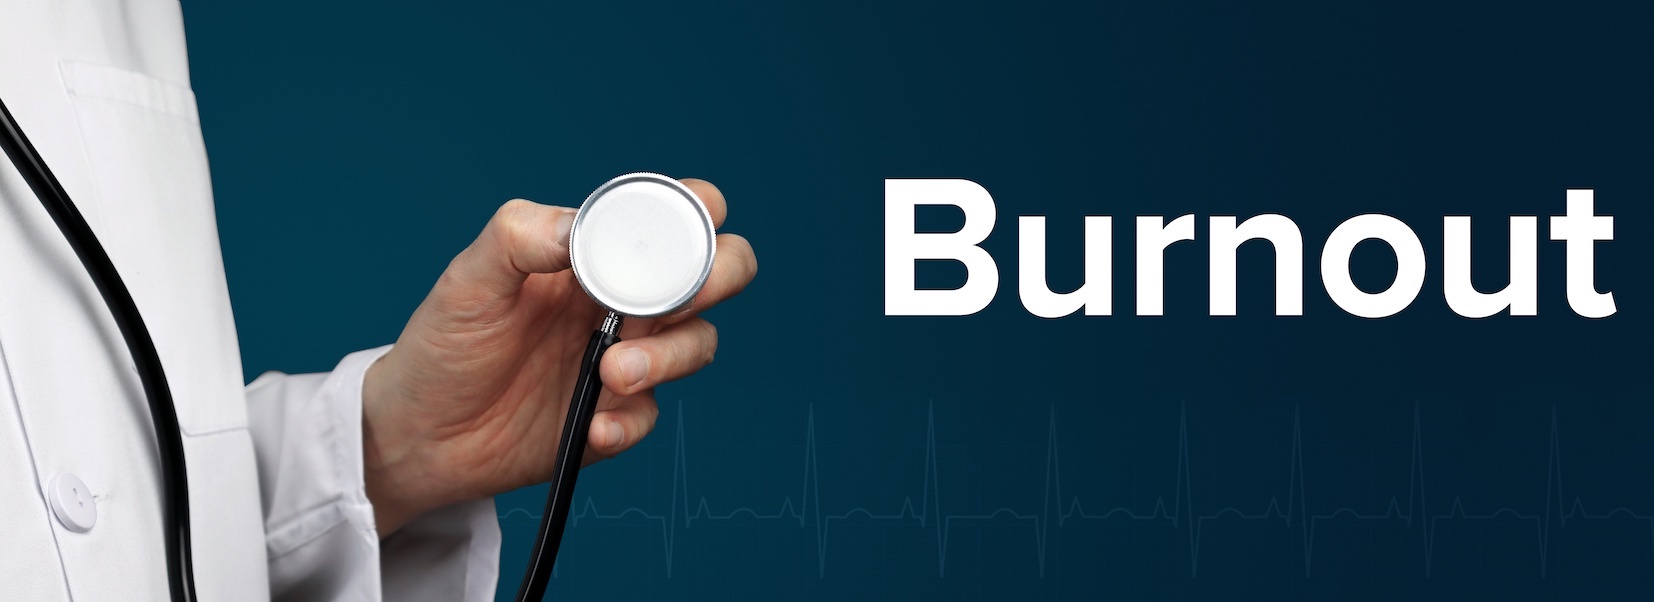 Addressing Clinician Burnout is Essential to Achieving the Goal of Better Care